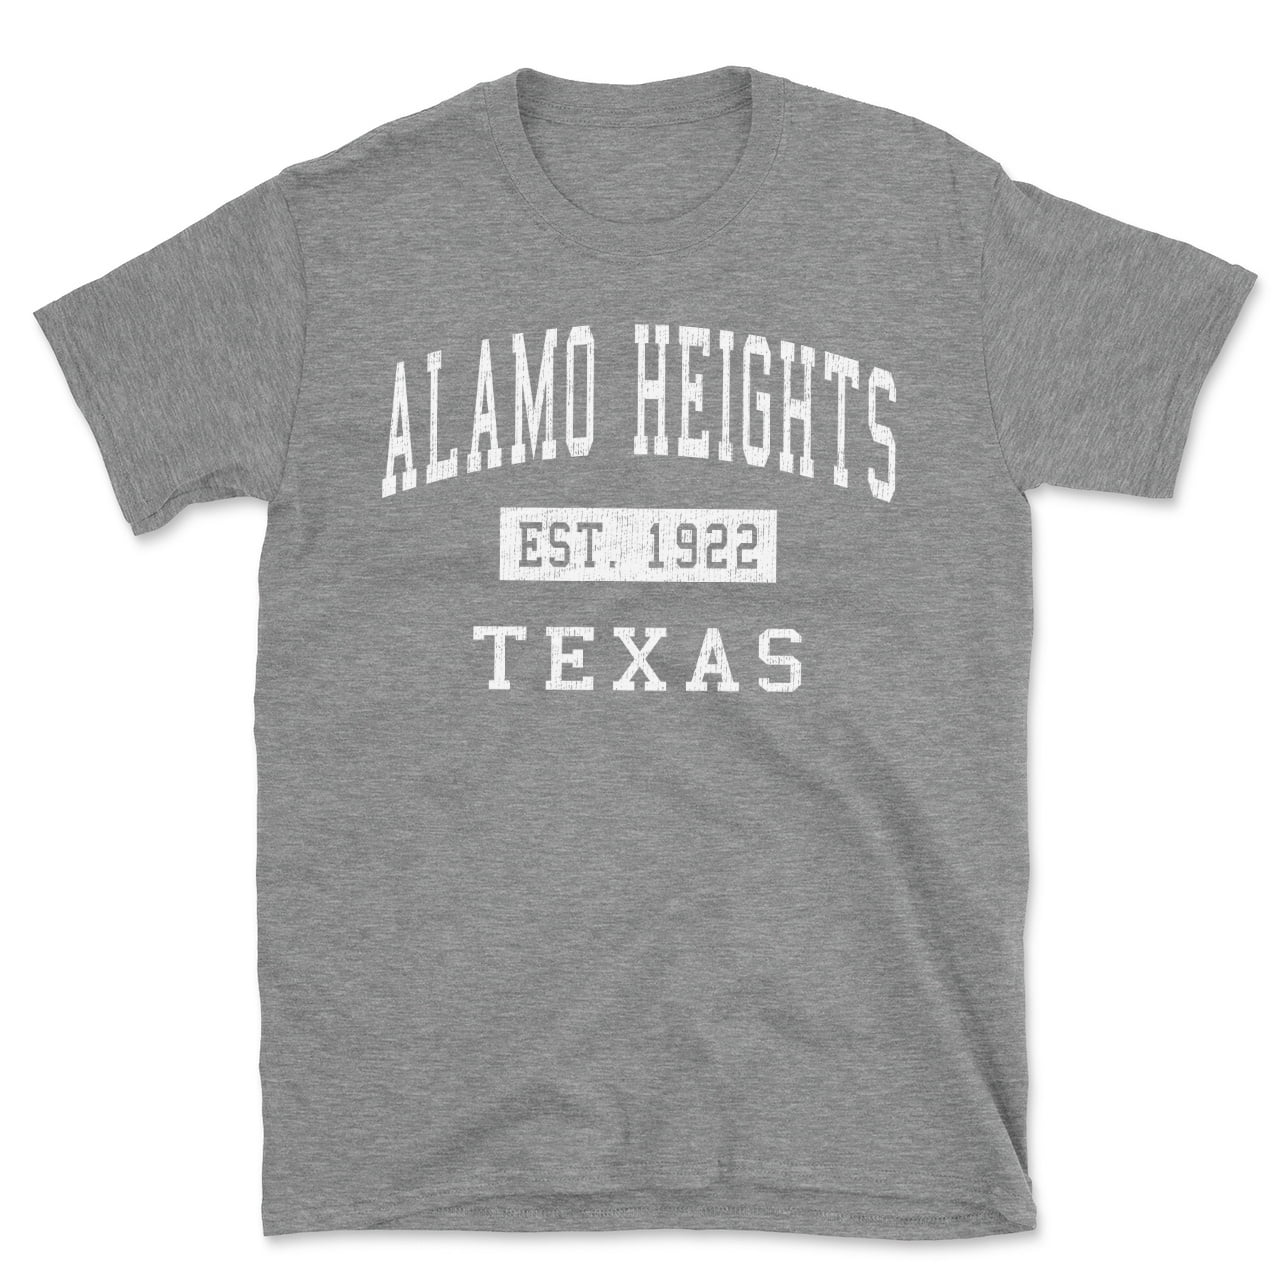 Best Lv Men T-shirt for sale in Alamo Heights, Texas for 2023